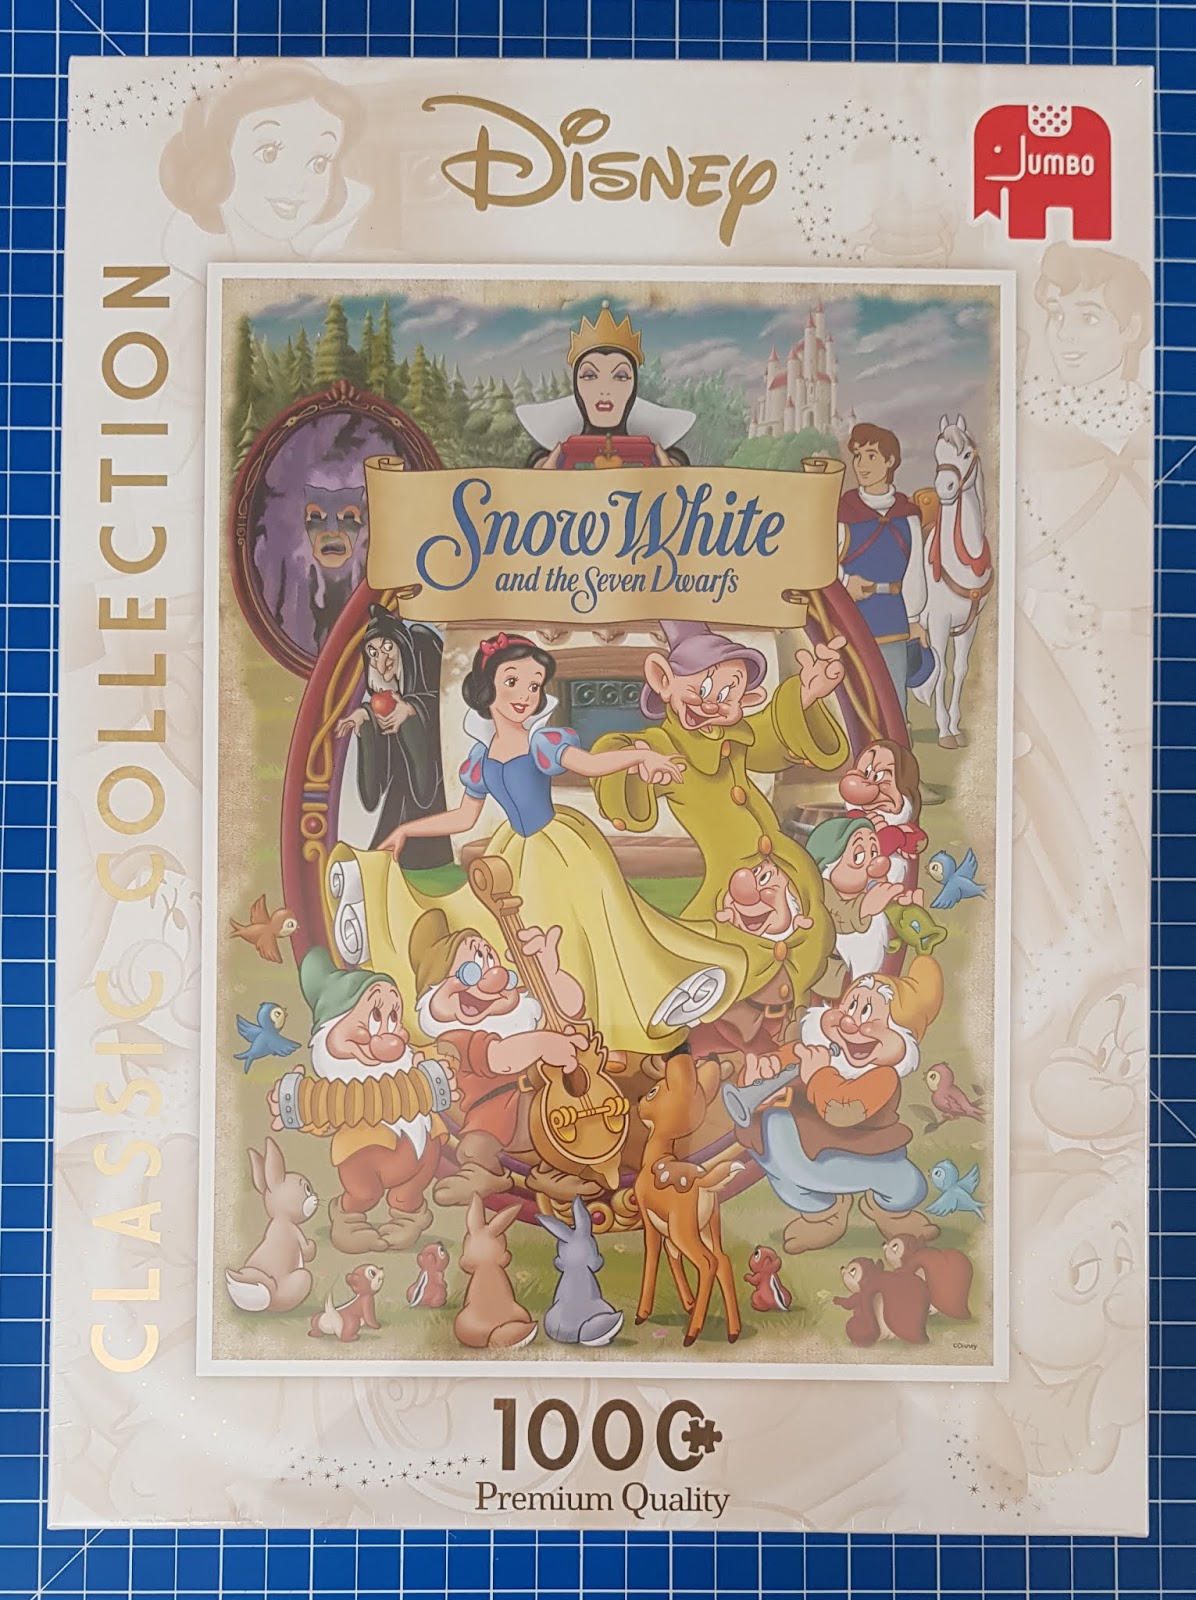 NEW Jumbo Games Snow White 1000 piece disney classic collection jigsaw puzzle 